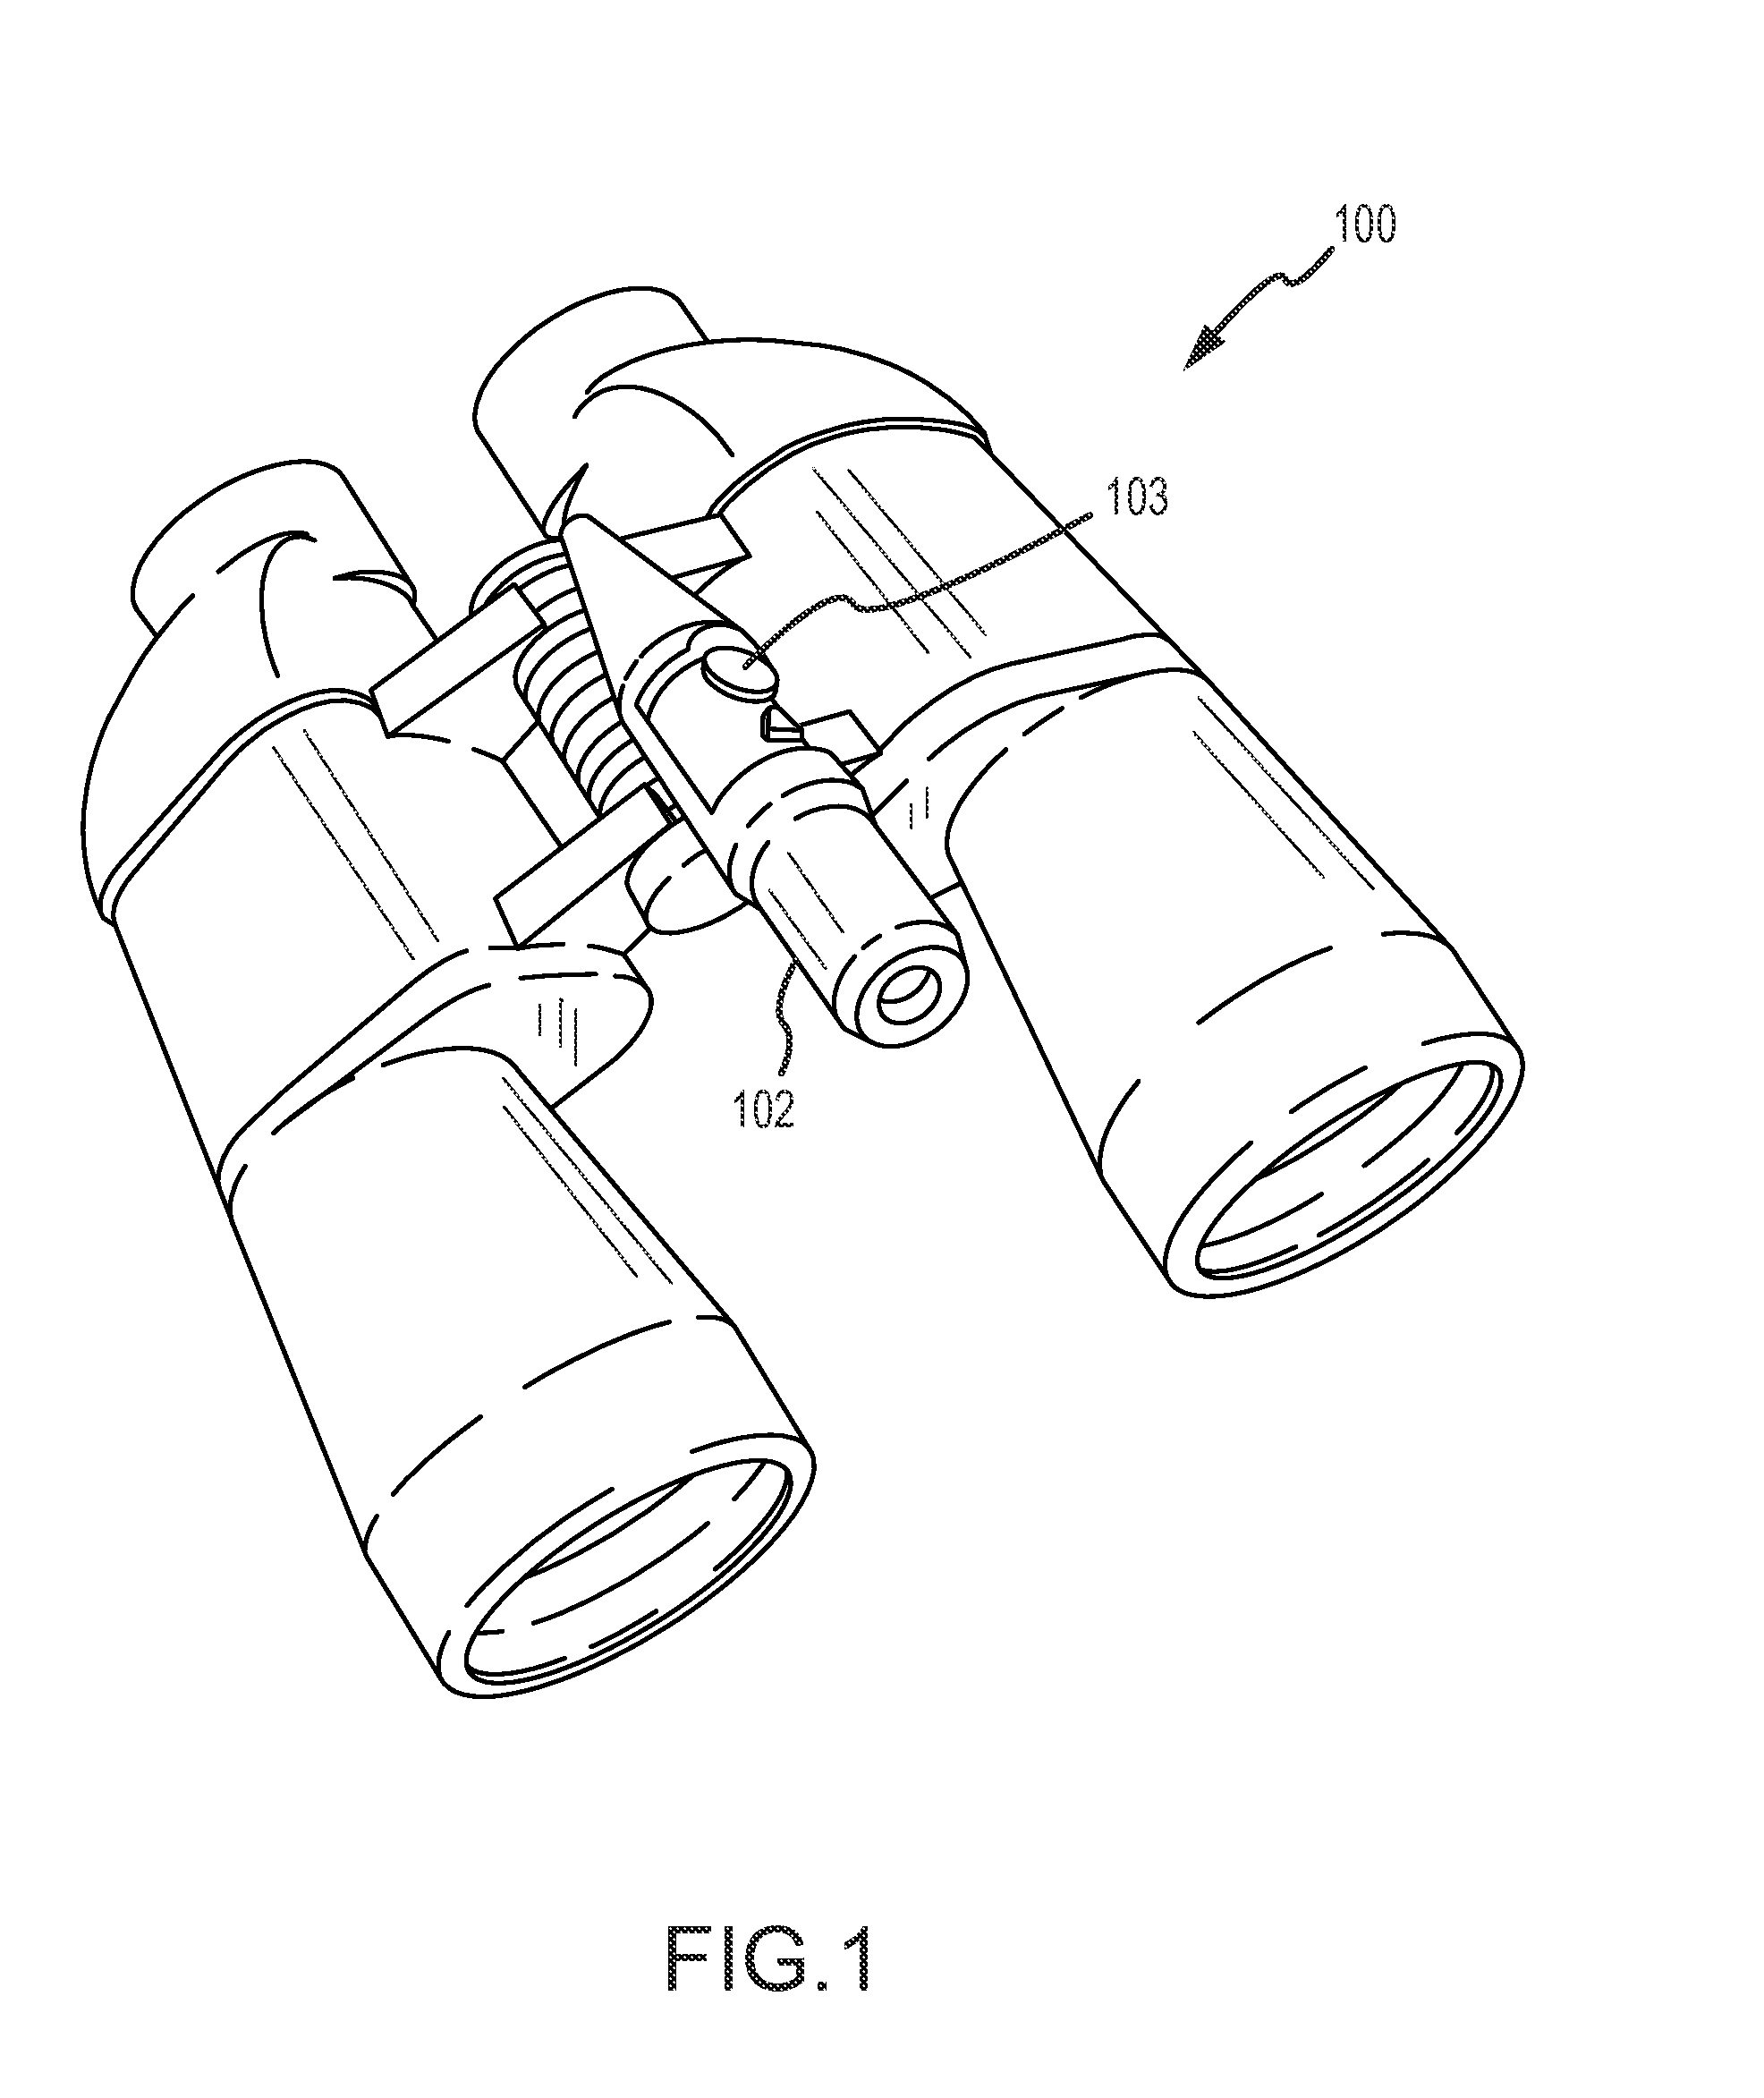 Laser targeting viewing device and method